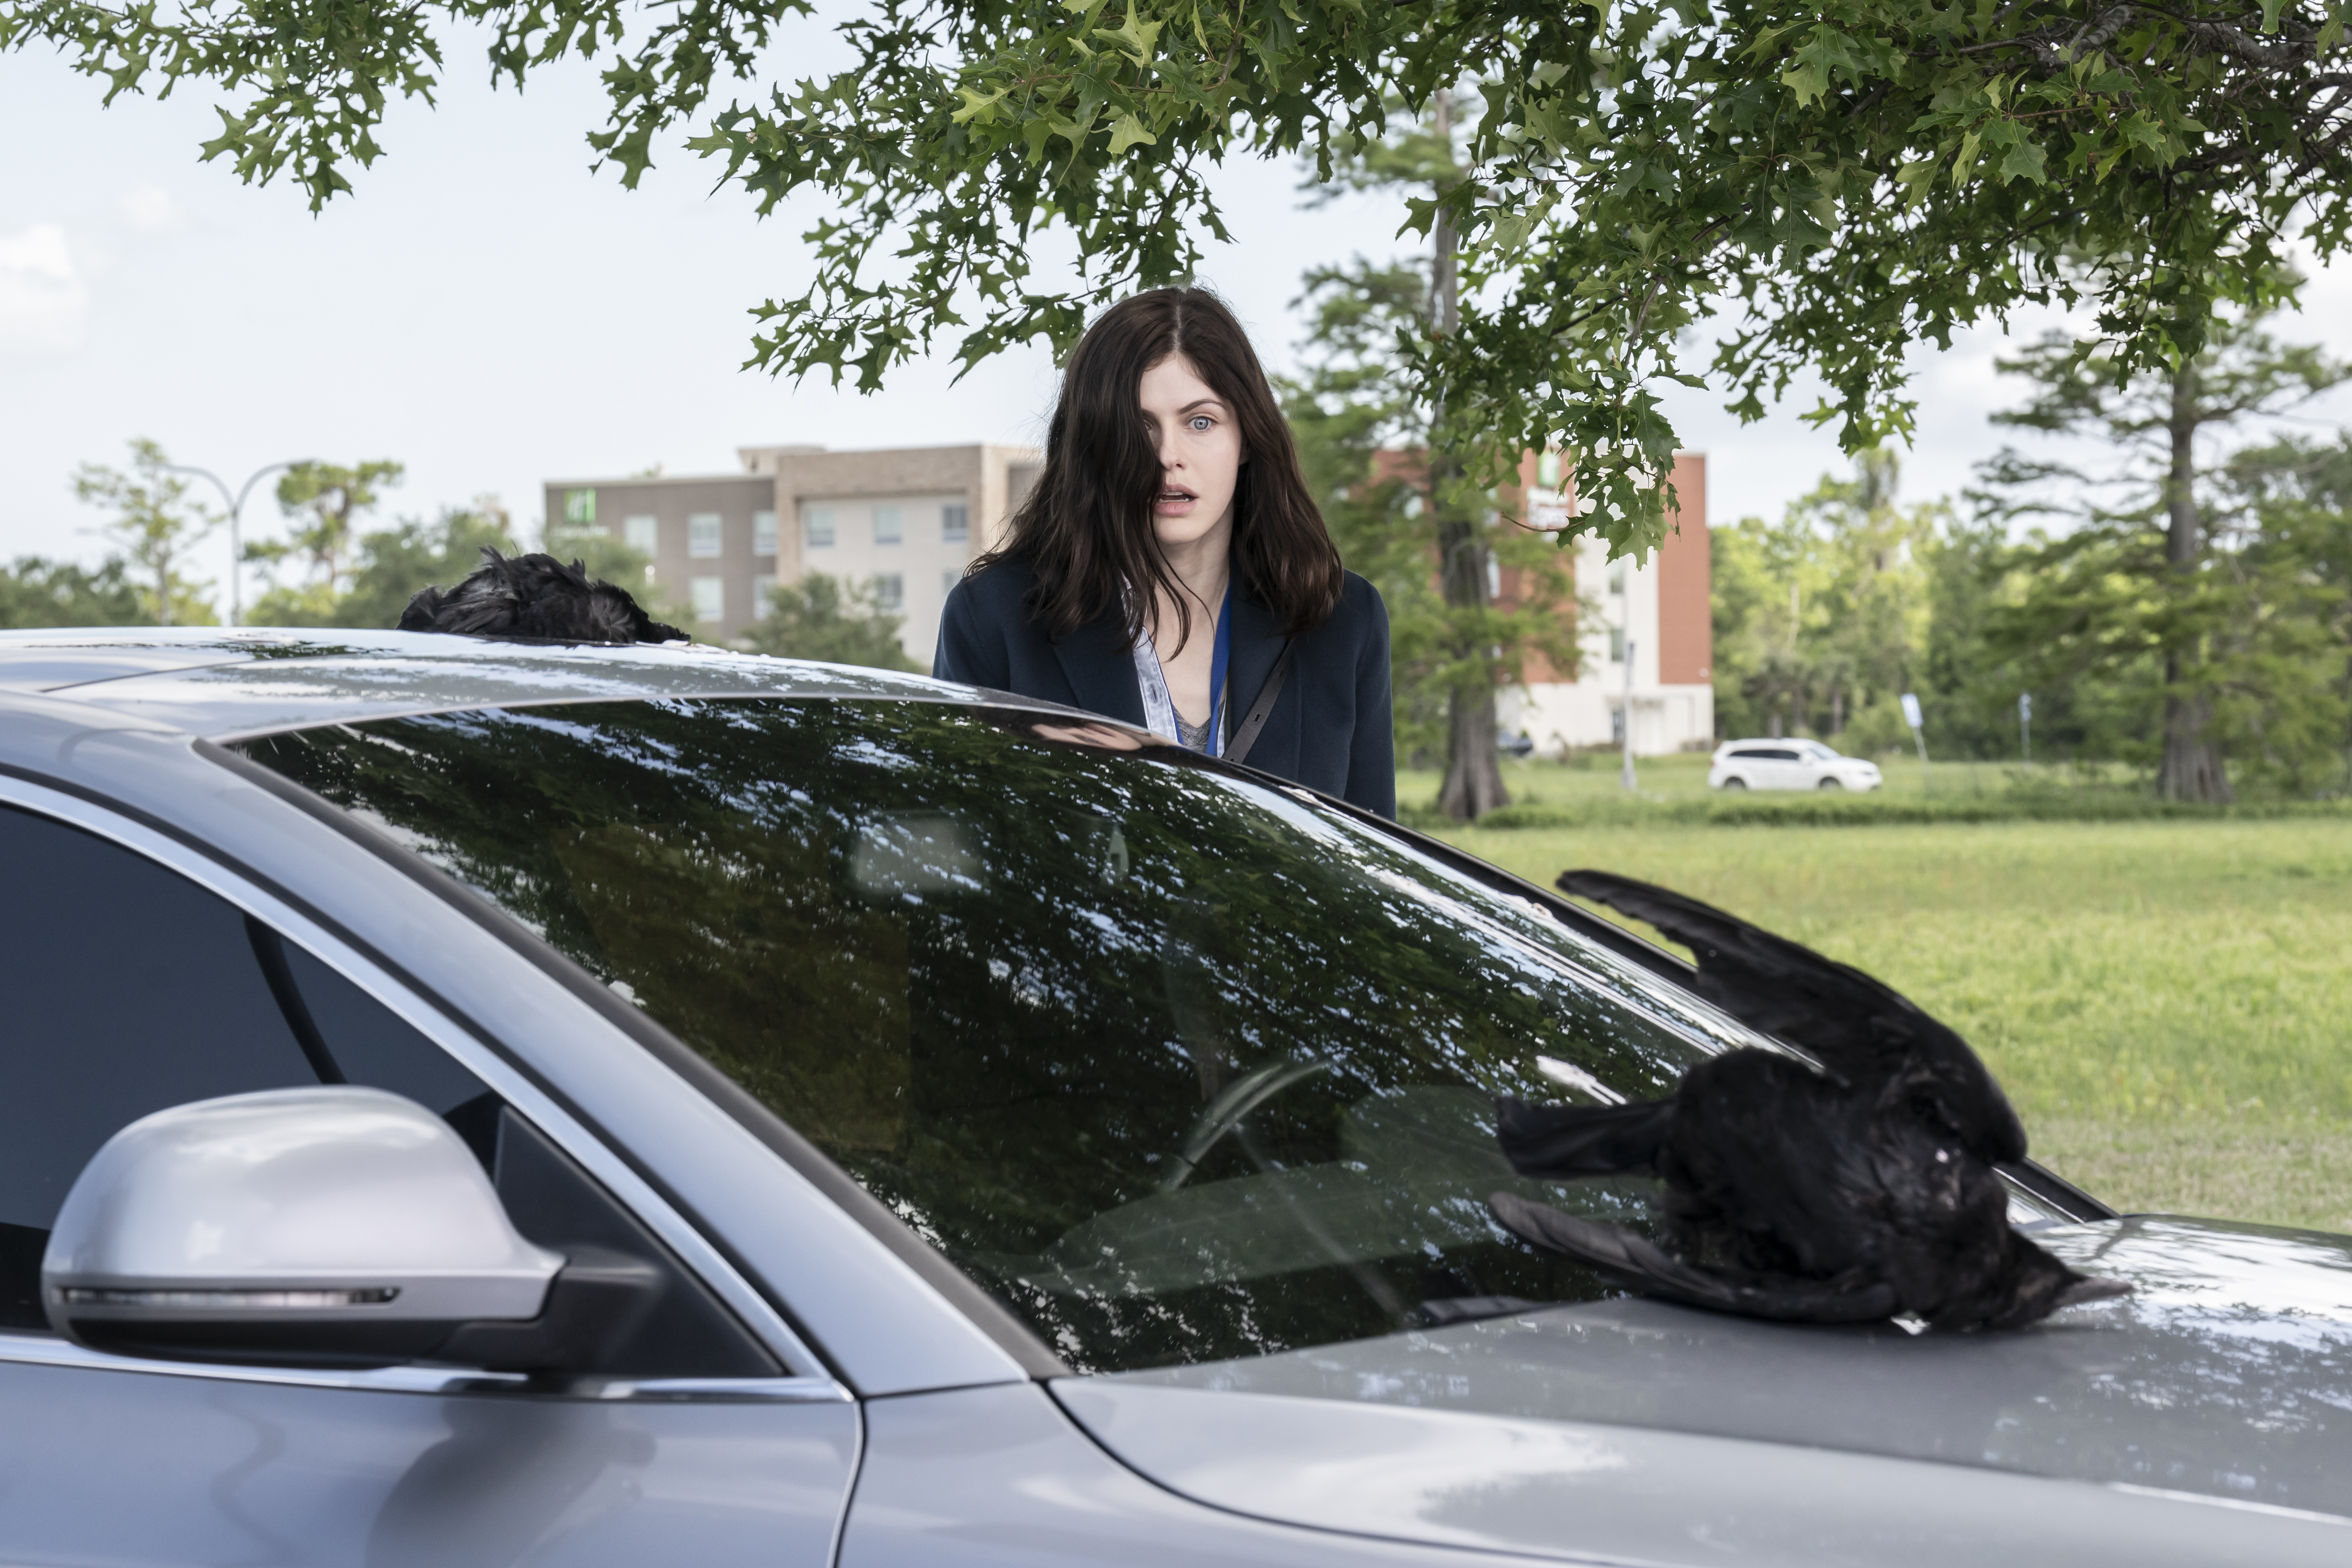 Rowan Mayfair stands horrified behind her car as a crow lands dead on the hood in AMC’s Mayfair Witches